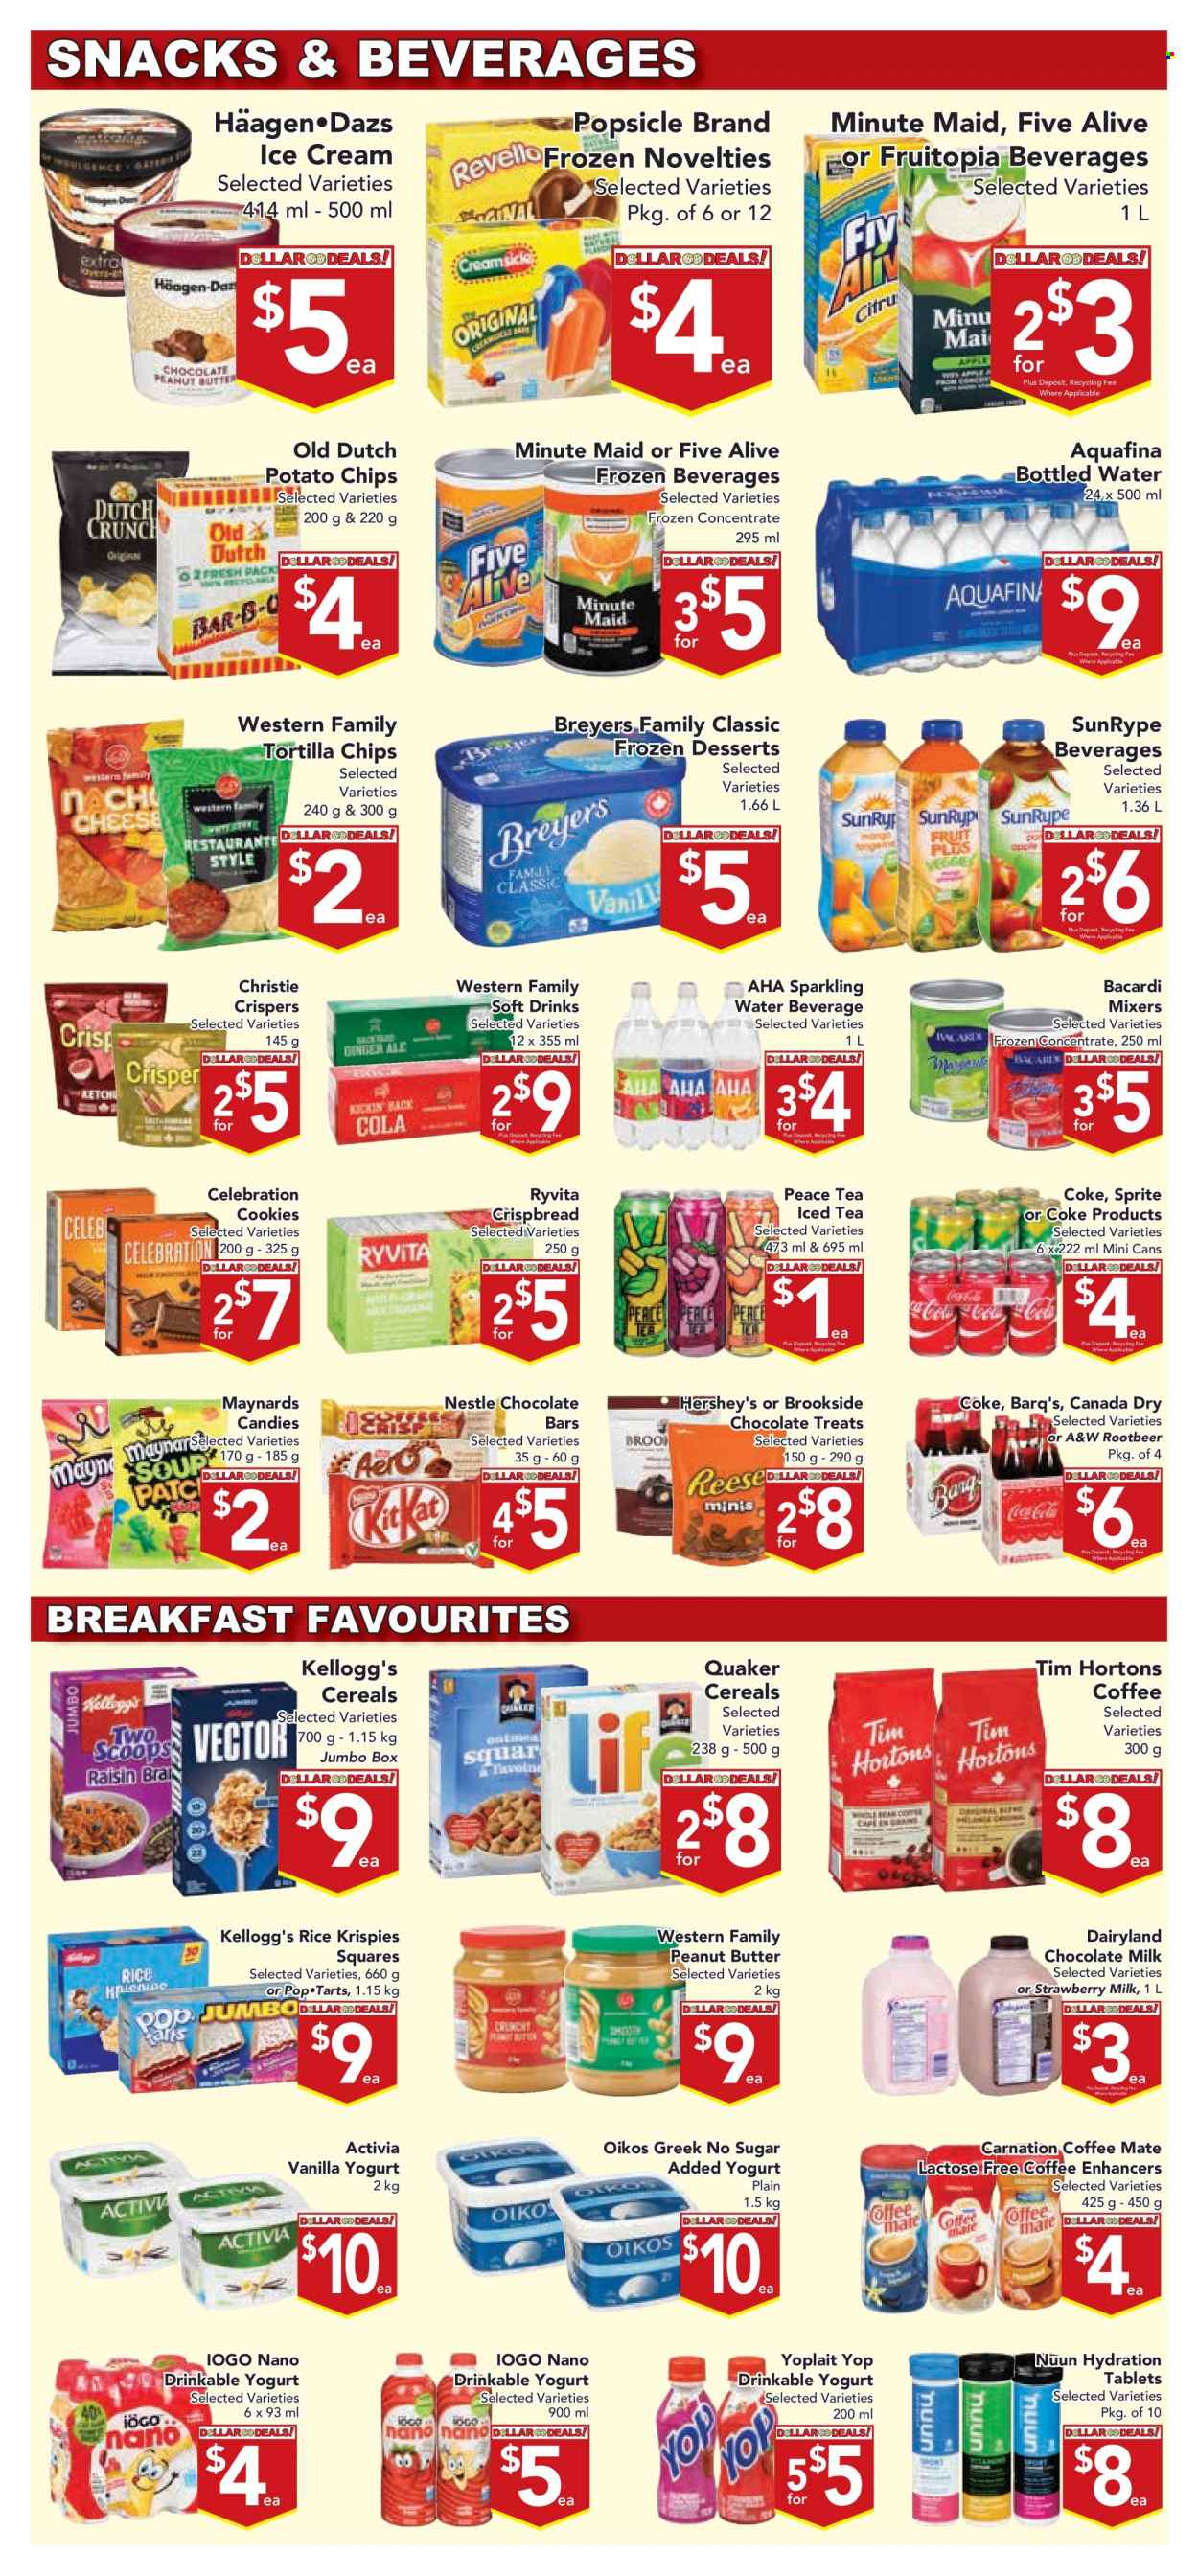 Buy-Low Foods flyer  - January 26, 2023 - February 01, 2023.